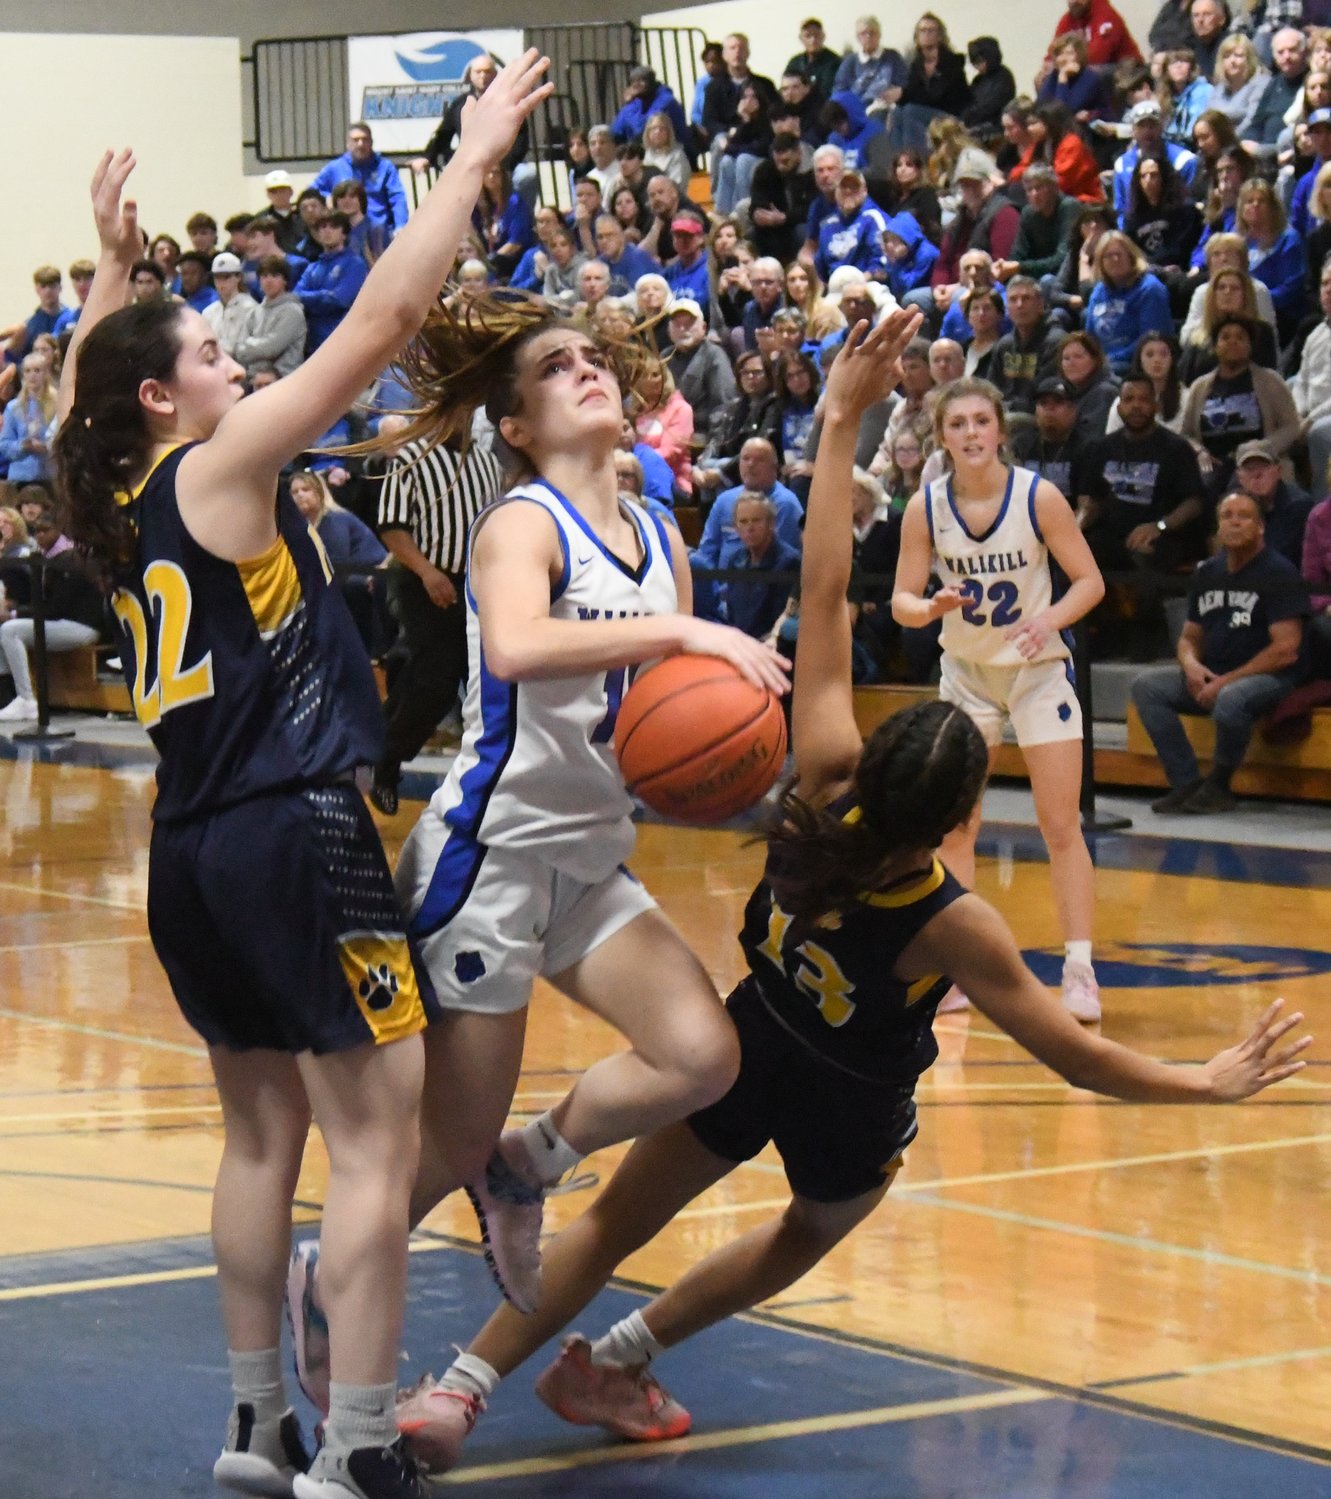 Wallkill's Zoe Mesuch drives through Walter Panas' Julia Gallinger and Sophia Tavarez as Wallkill's Emma Spindler looks on during Saturday's NYSPHSAA Class A regional final at Mount Saint Mary College in Newburgh.